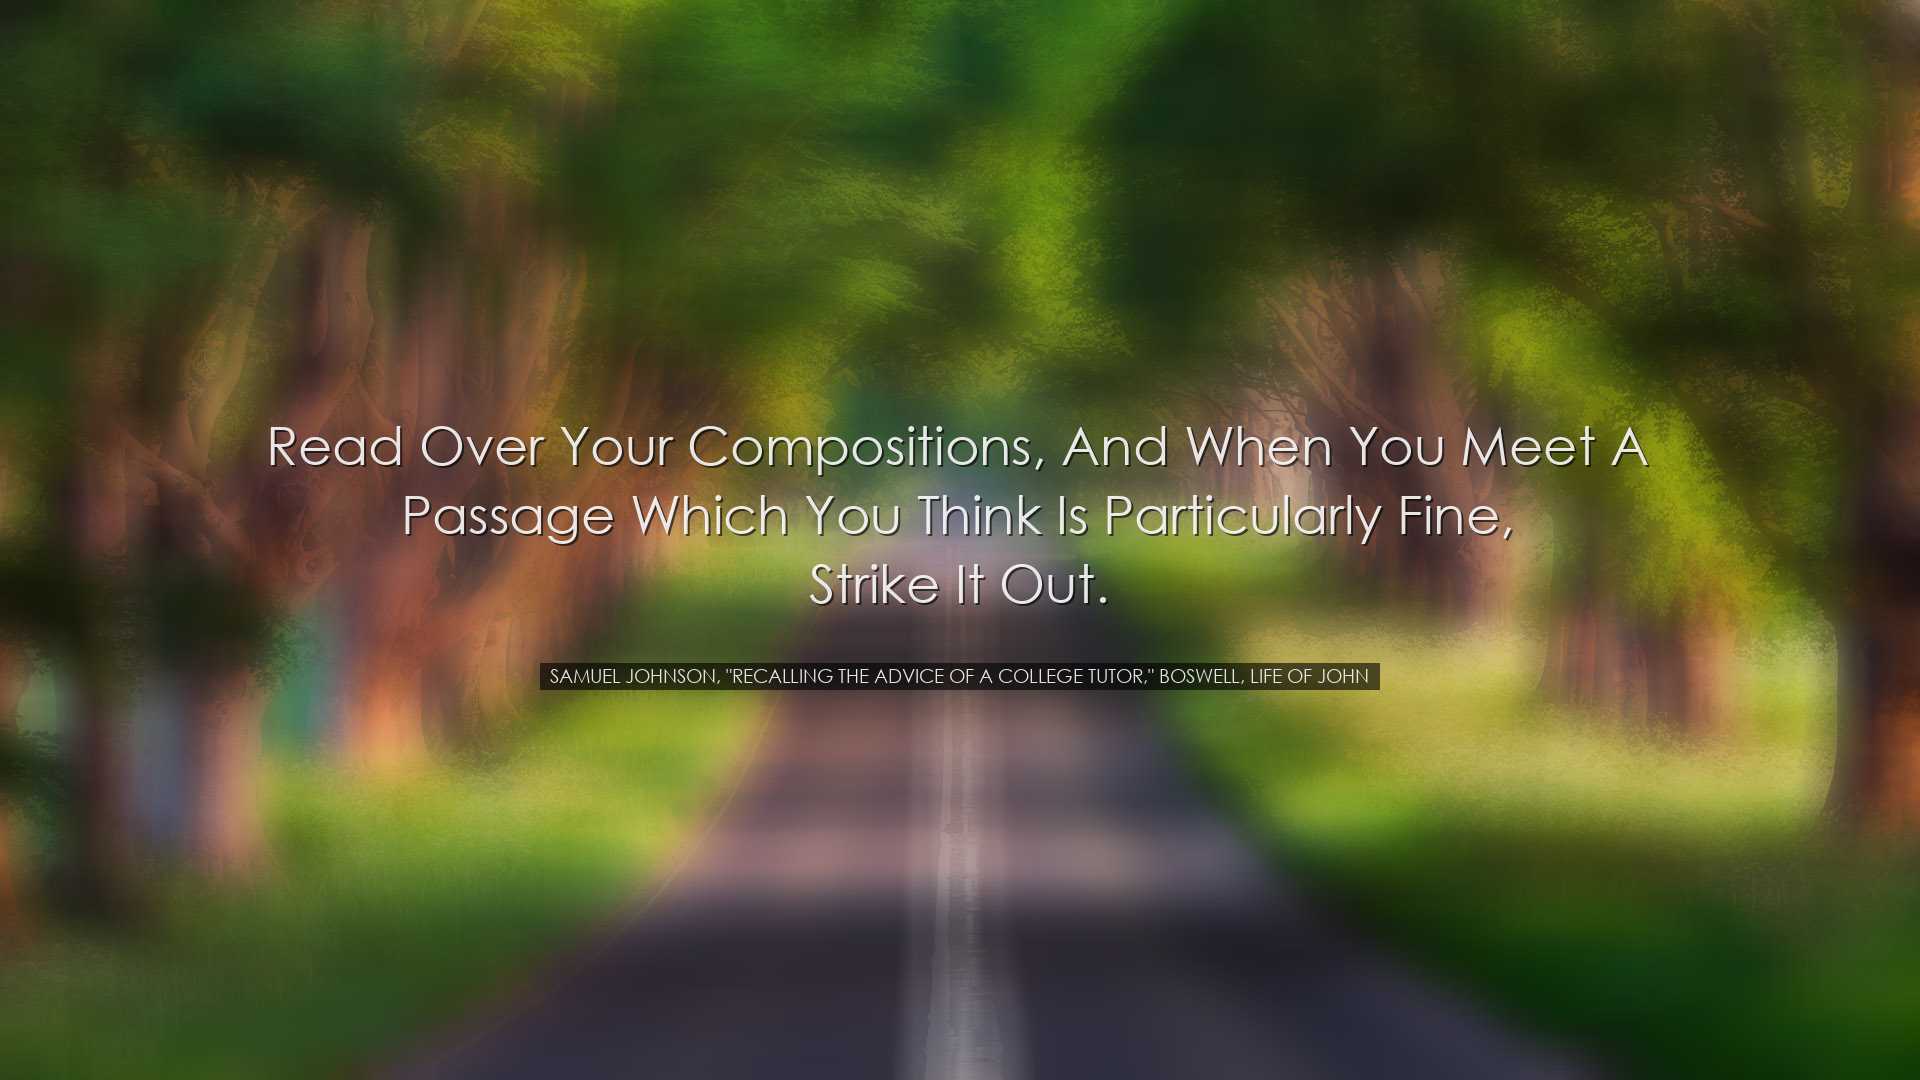 Read over your compositions, and when you meet a passage which you